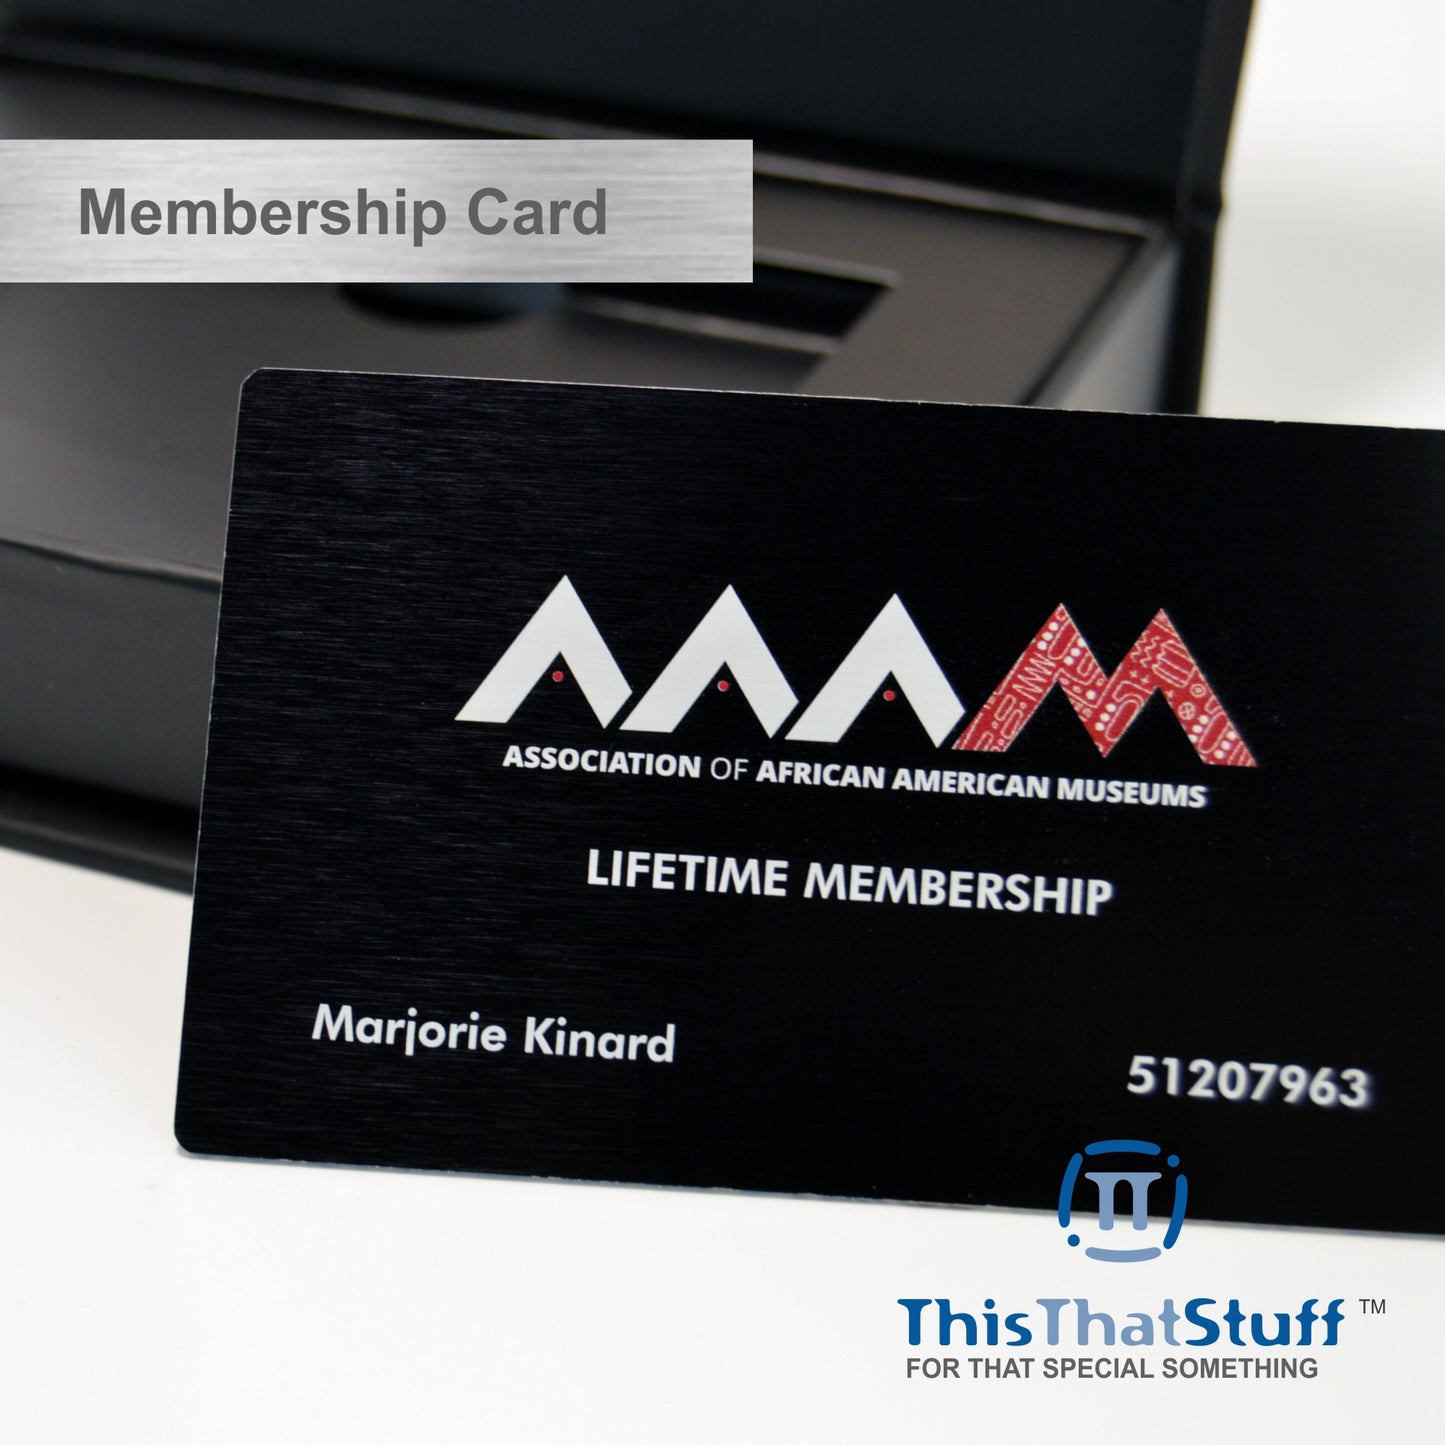 Custom Printed AluSwiss Metal Cards | Credit Card Sized | Aluminum for Membership Cards, Business Cards and Invitations